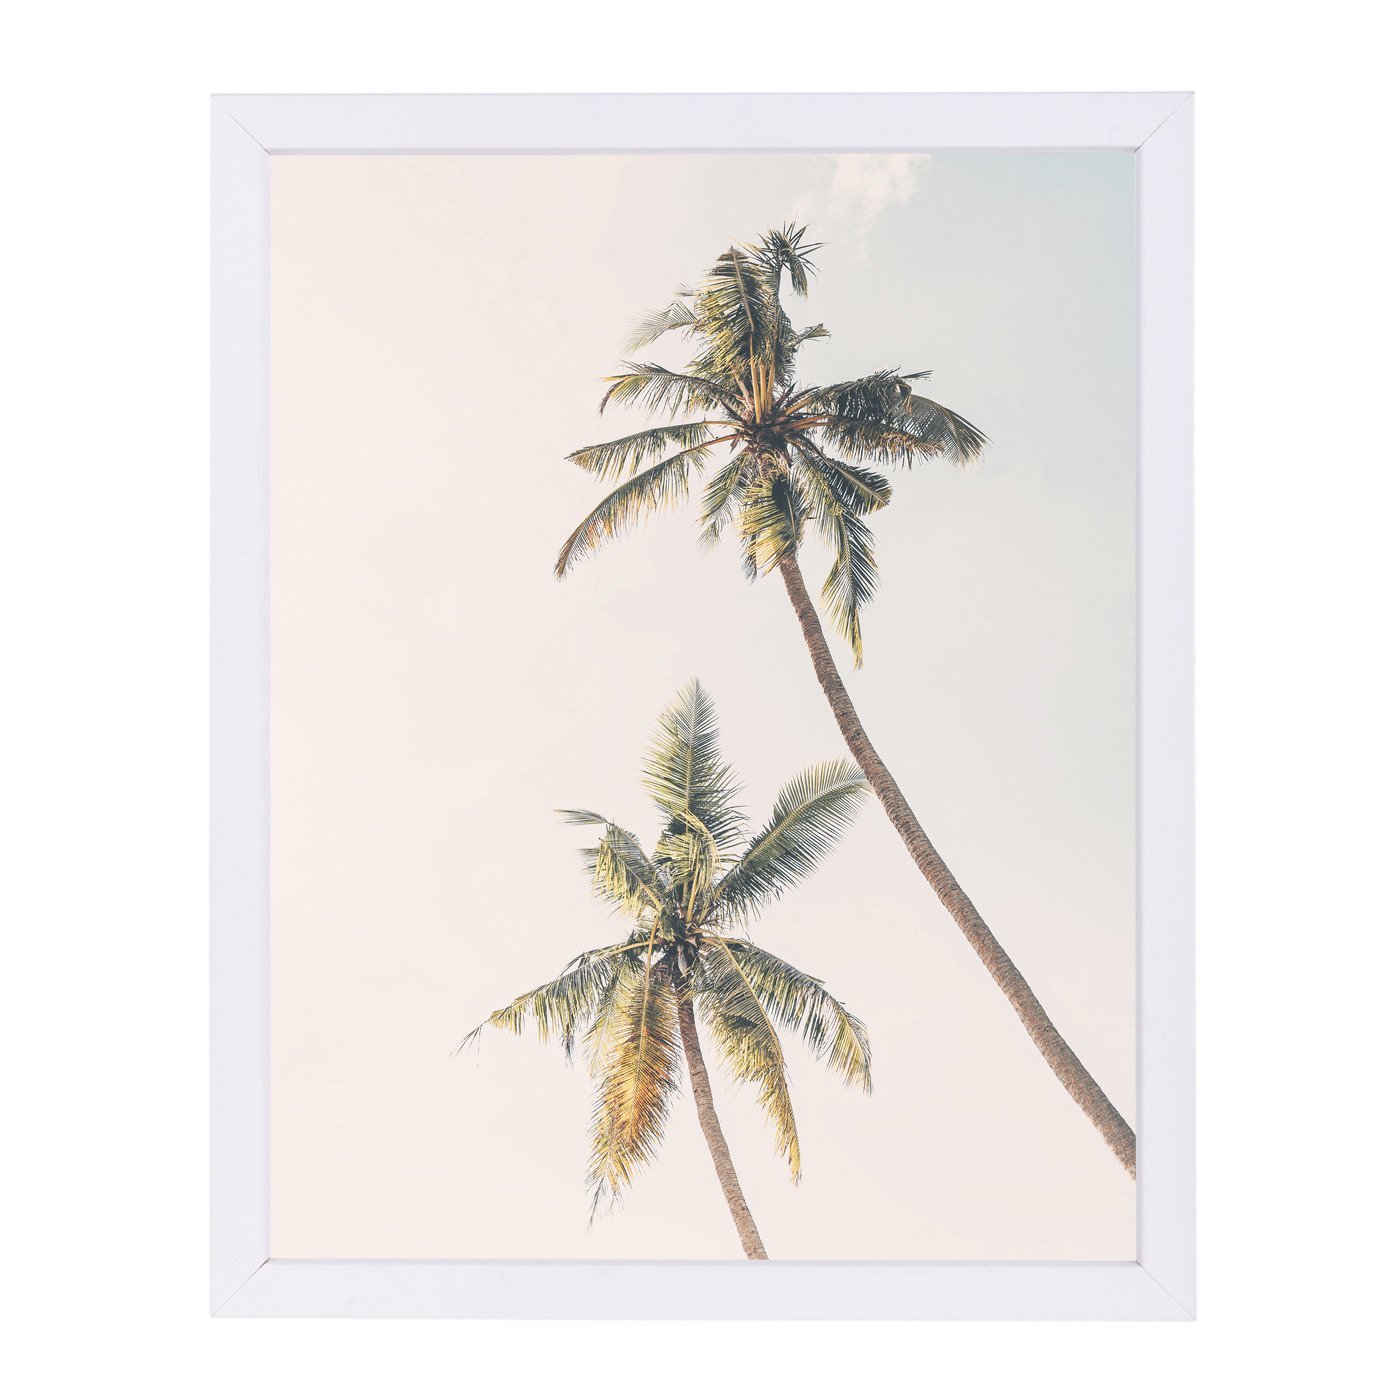 Blush Palm Tree 2 By Sisi And Seb - Framed Print - Americanflat